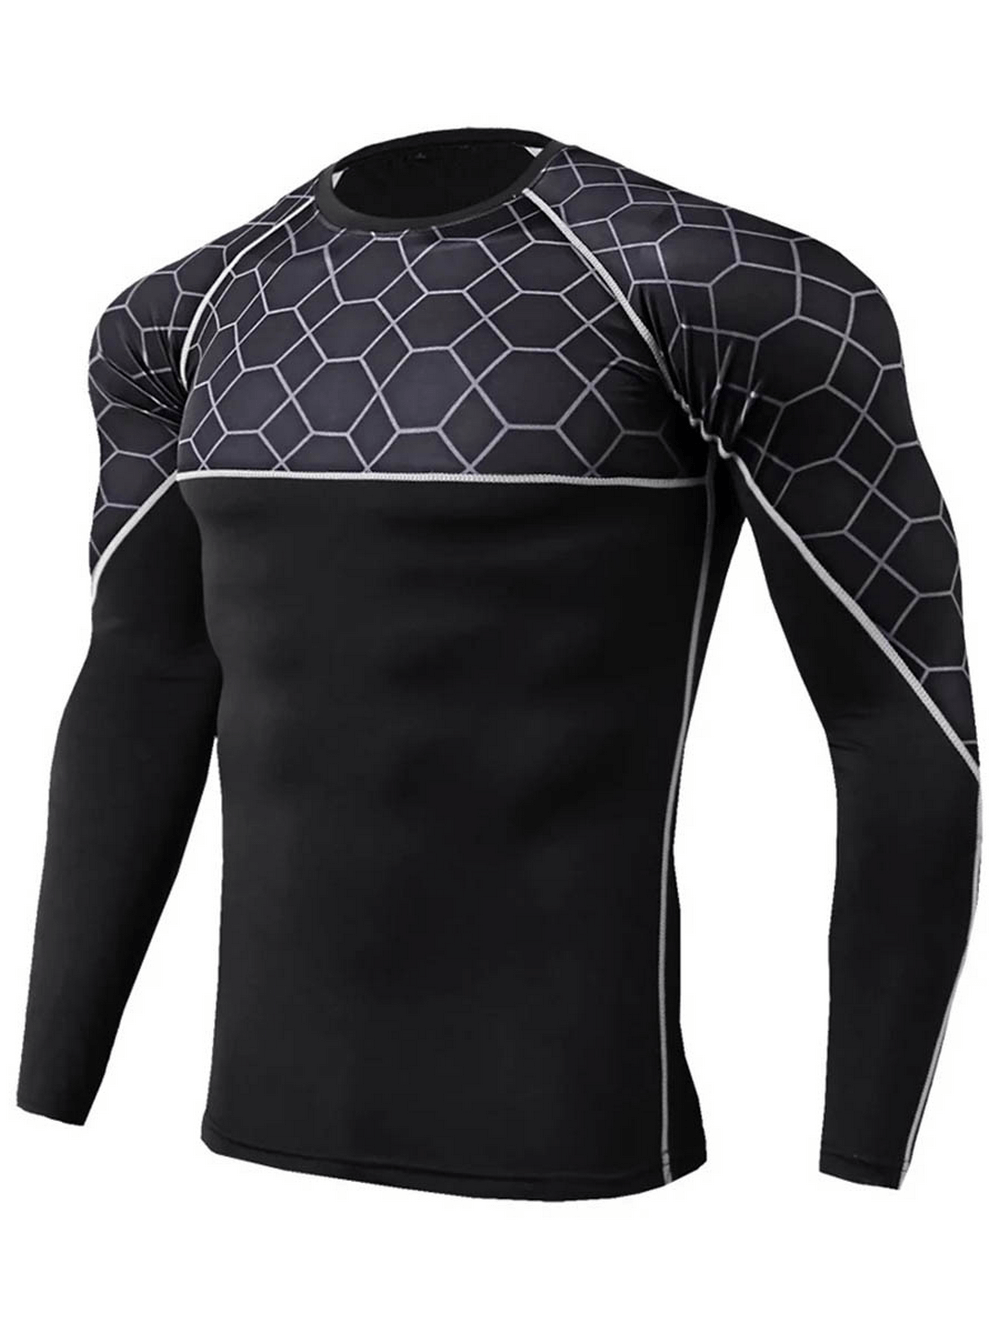 Men's Athletic Long Sleeve Sports Top - SF2223